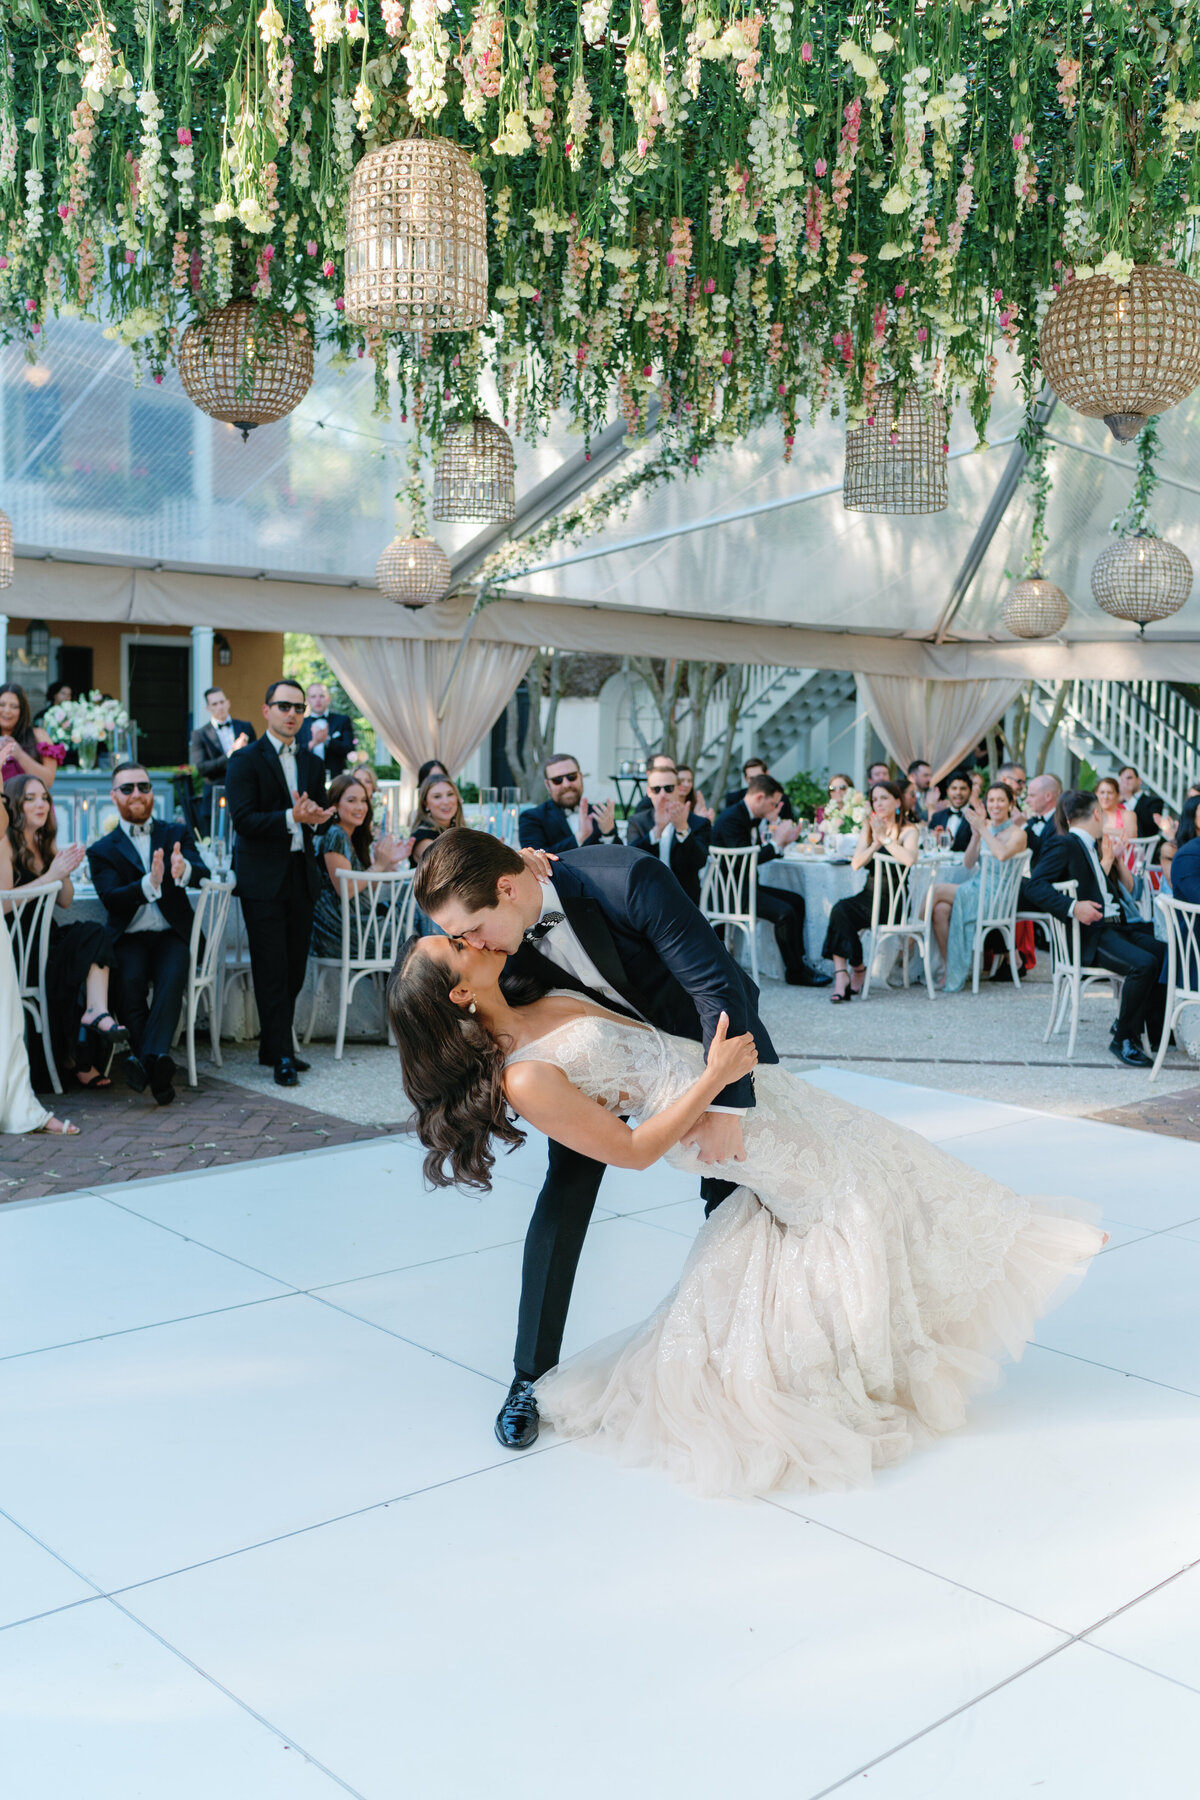 First dance on all white dance floor with hanging flowers. Spring wedding at Thomas Bennett House.  Destination wedding photographer.